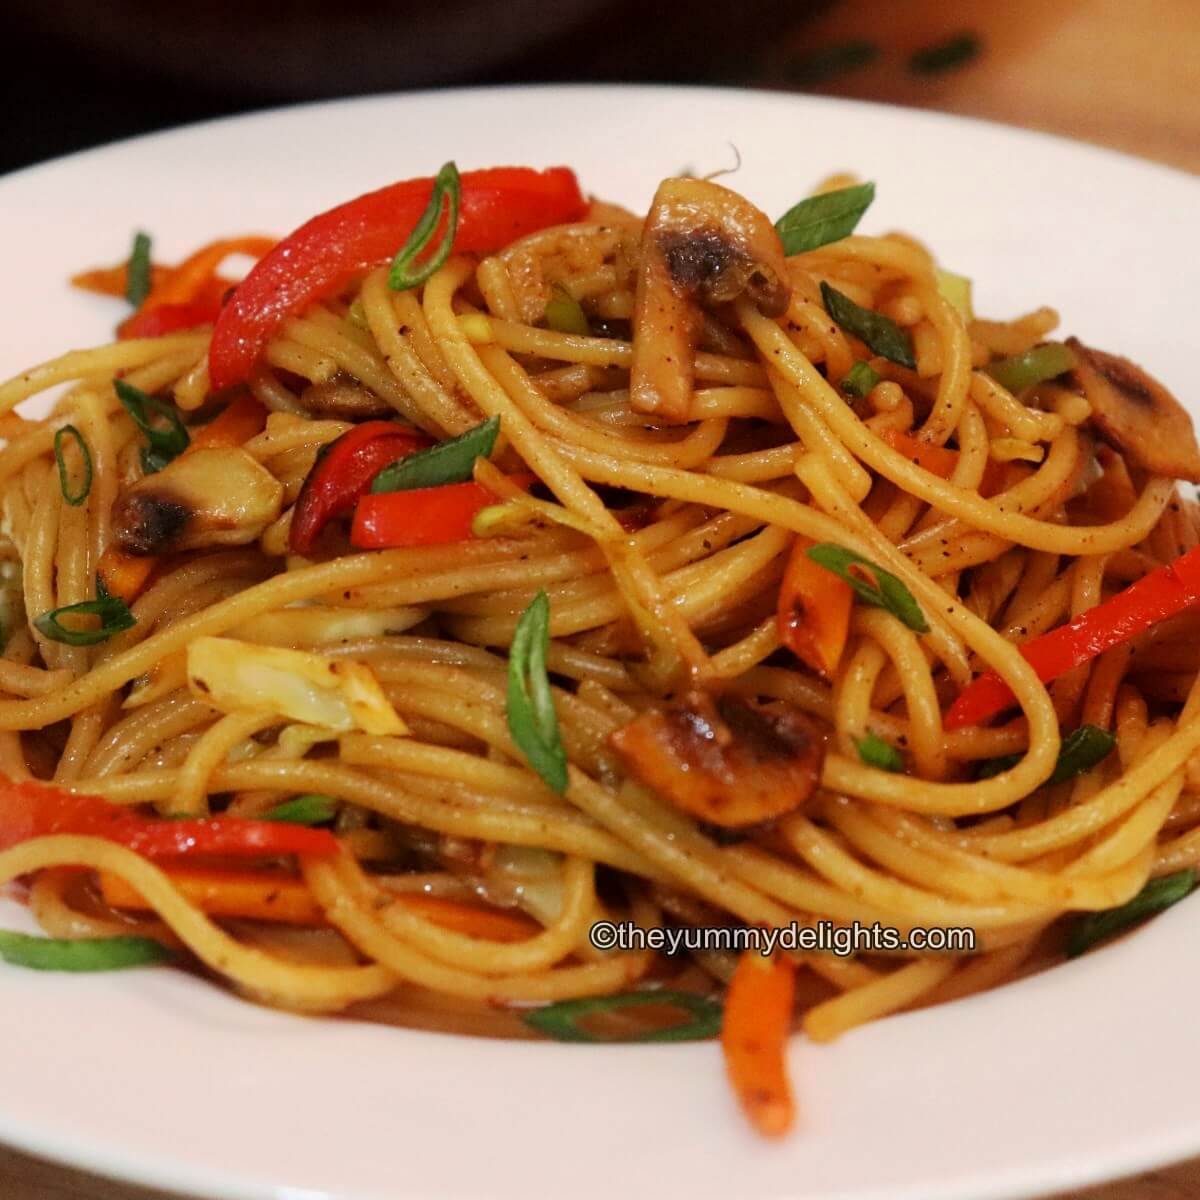 vegetable lo mein served on a white plate garnished with spring onion greens.